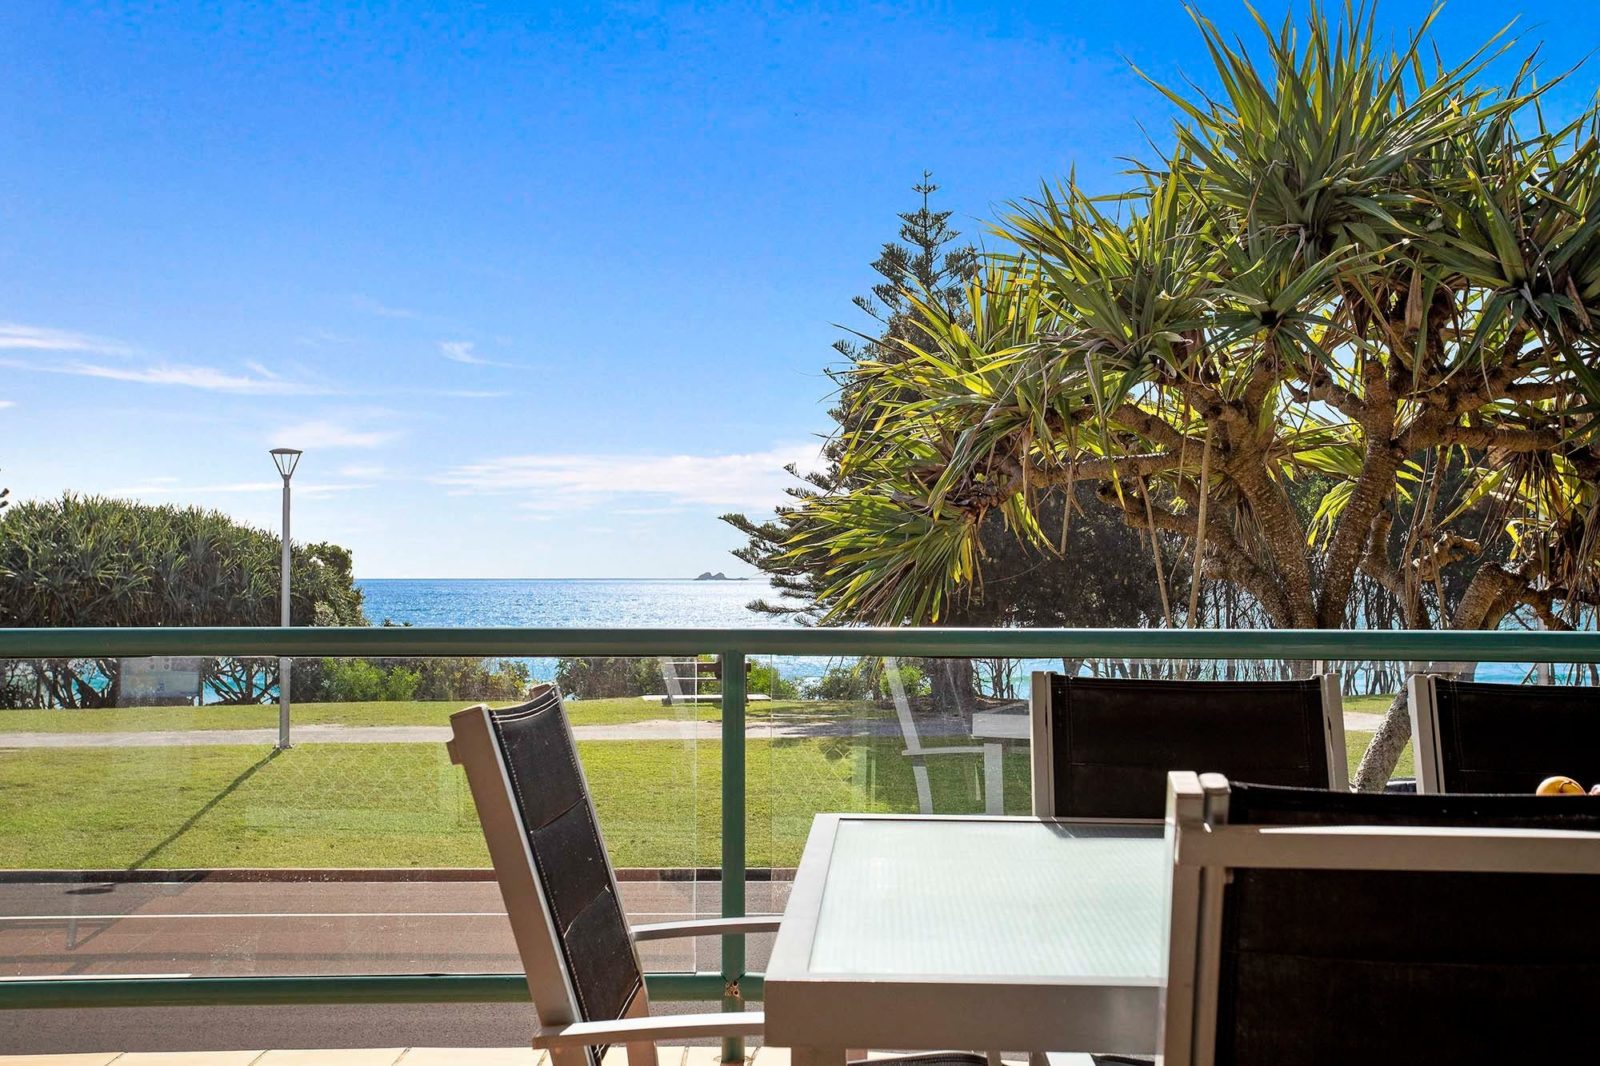 Apartment 3 Surfside - Byron Bay - Veranda Dining and View